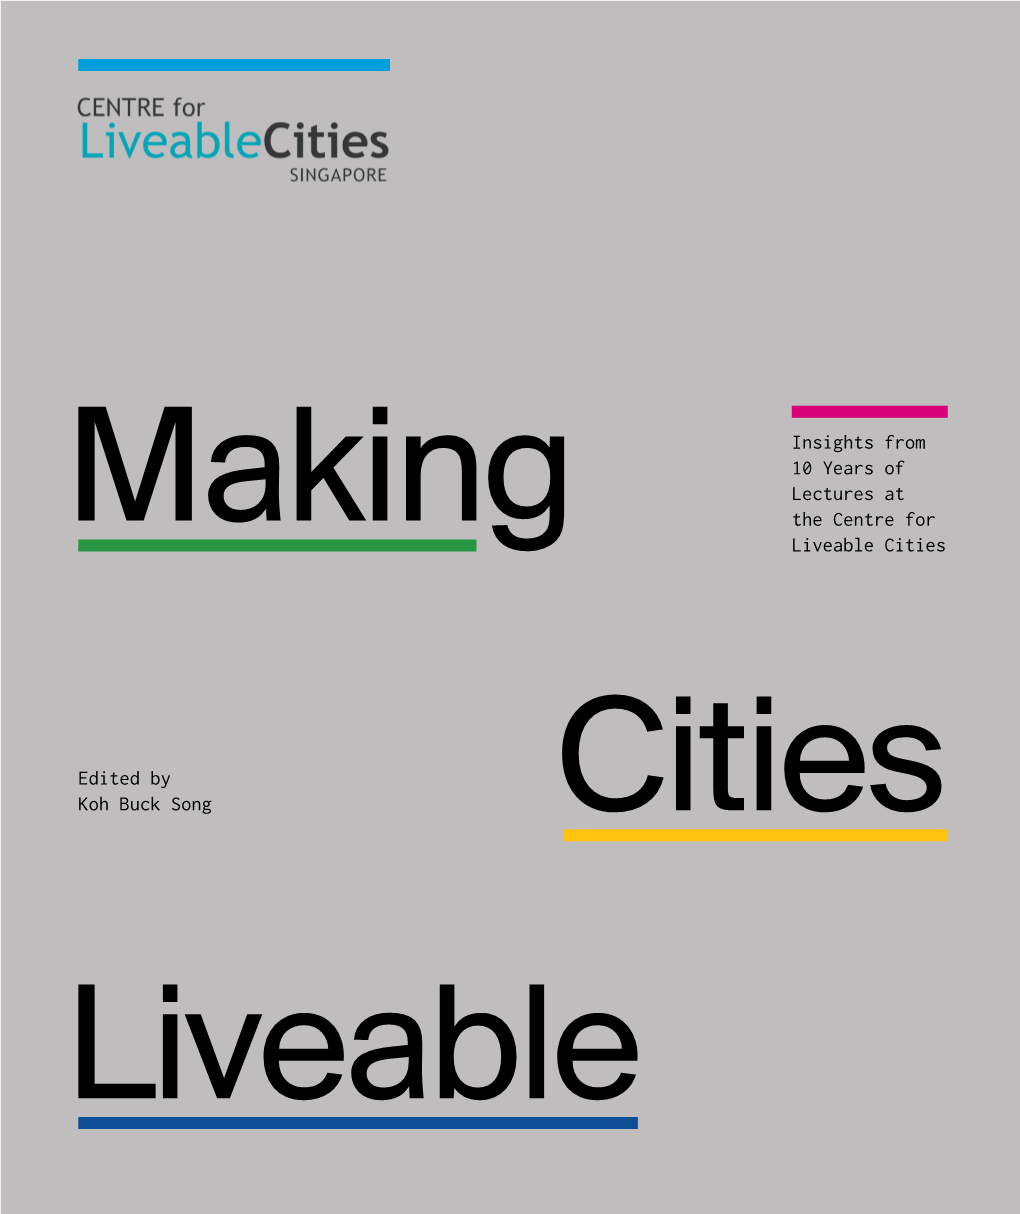 Edited by Koh Buck Song Insights from 10 Years of Lectures at the Centre for Liveable Cities